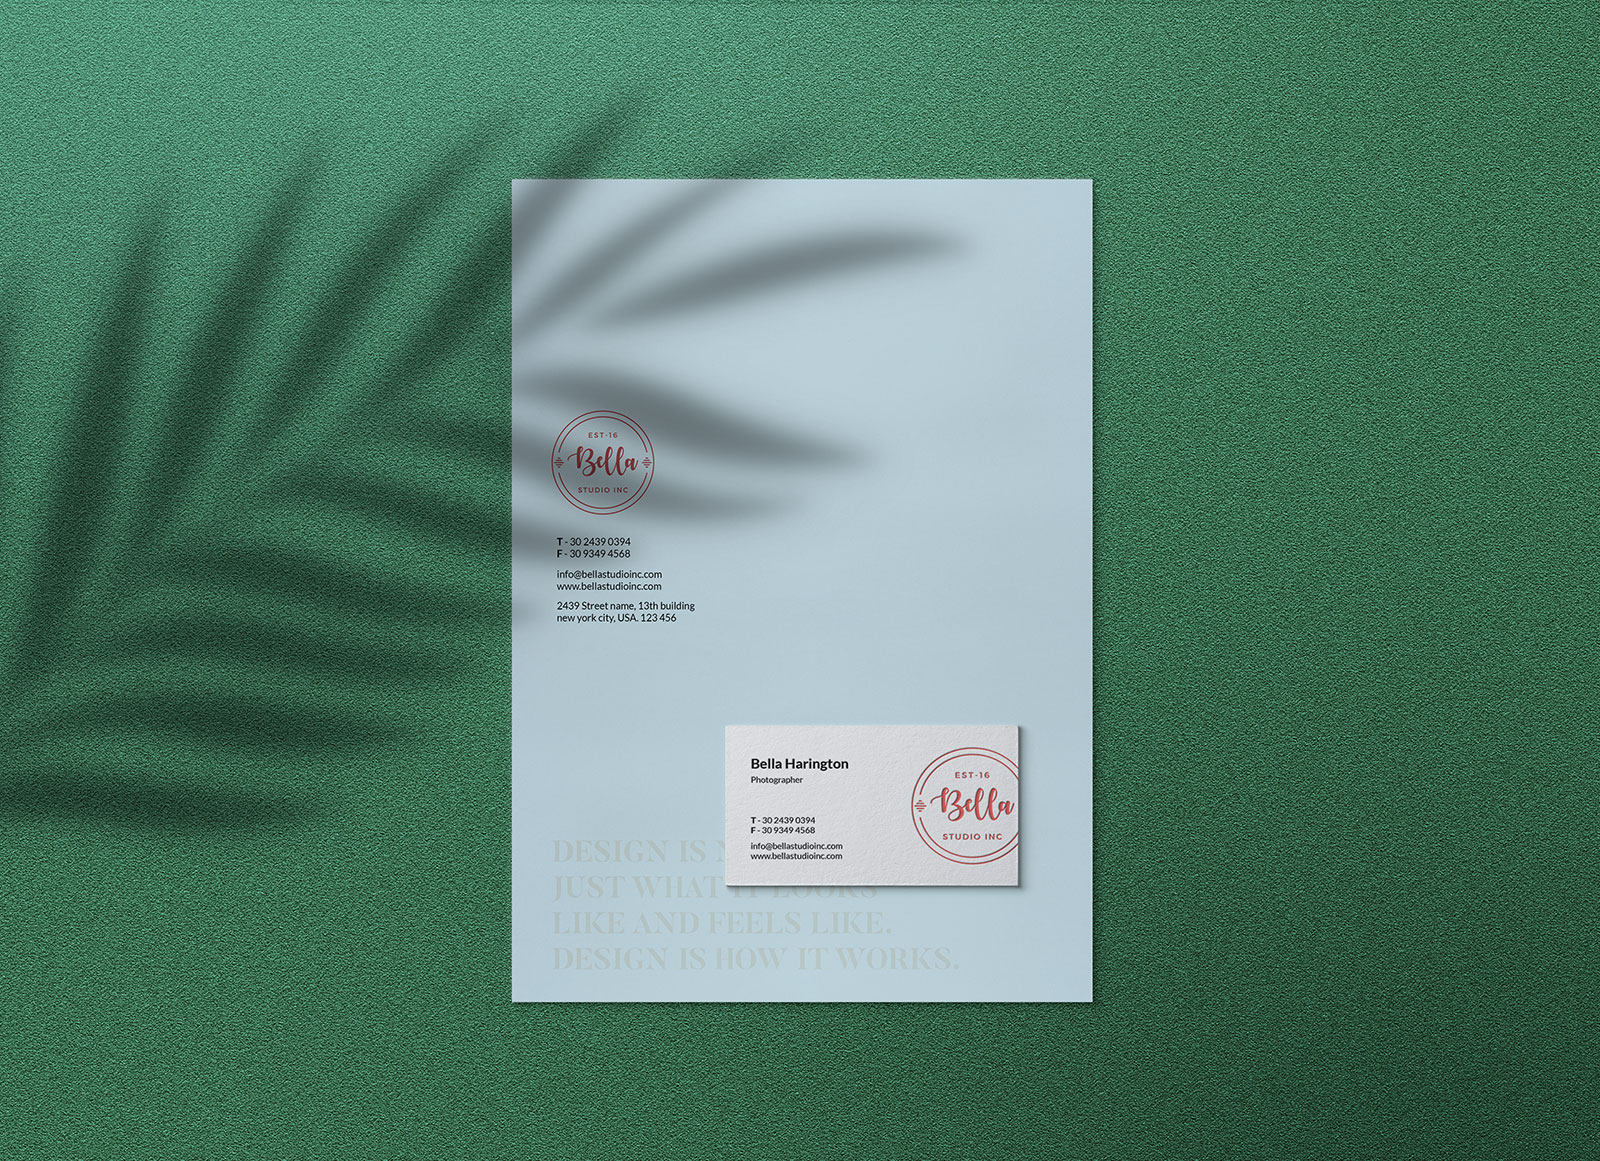 Download Free Letterhead Business Card Mockup Psd With Shadow Overlay Good Mockups